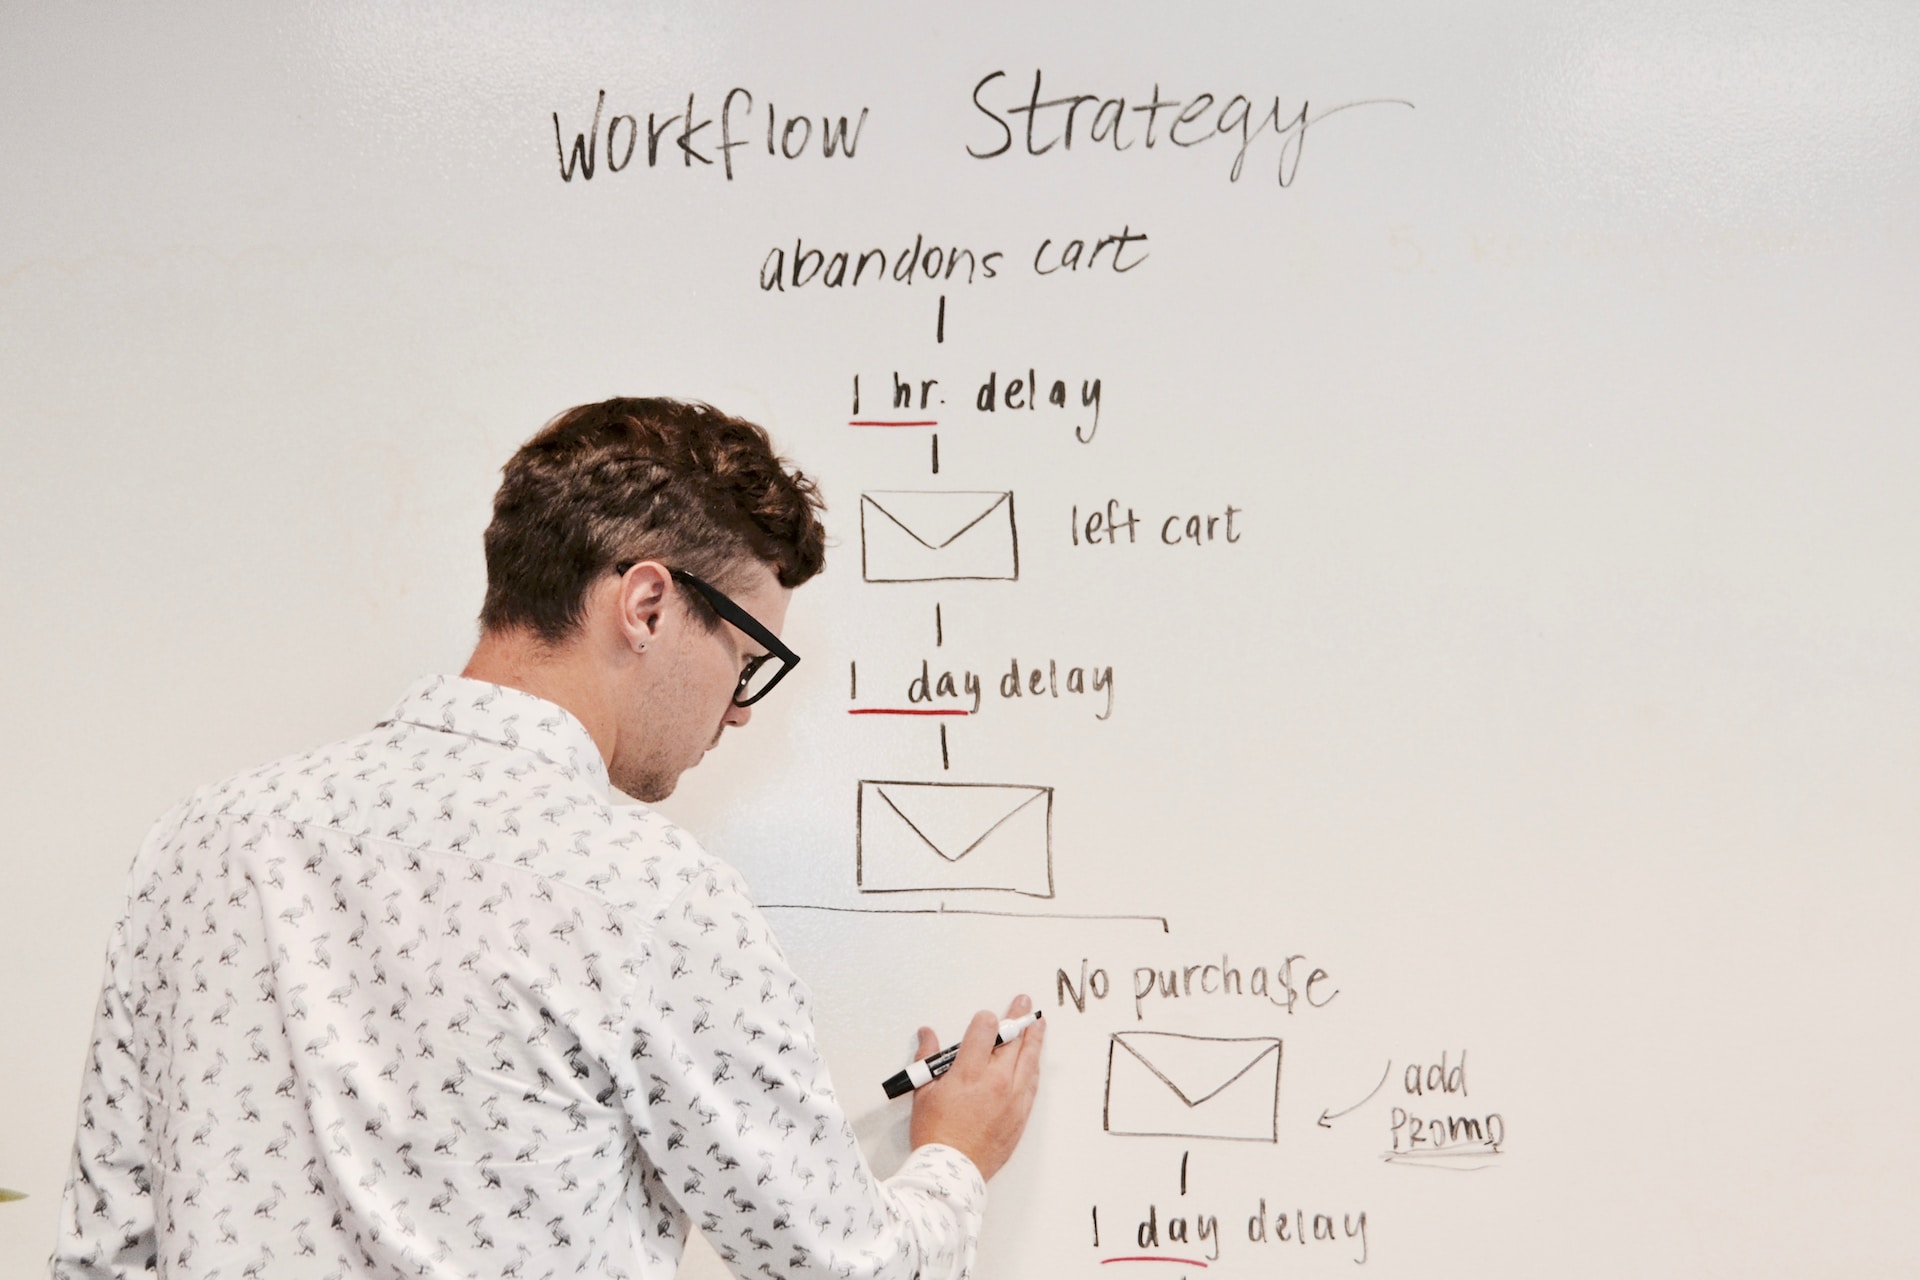 Man writing a workflow strategy on a whiteboard